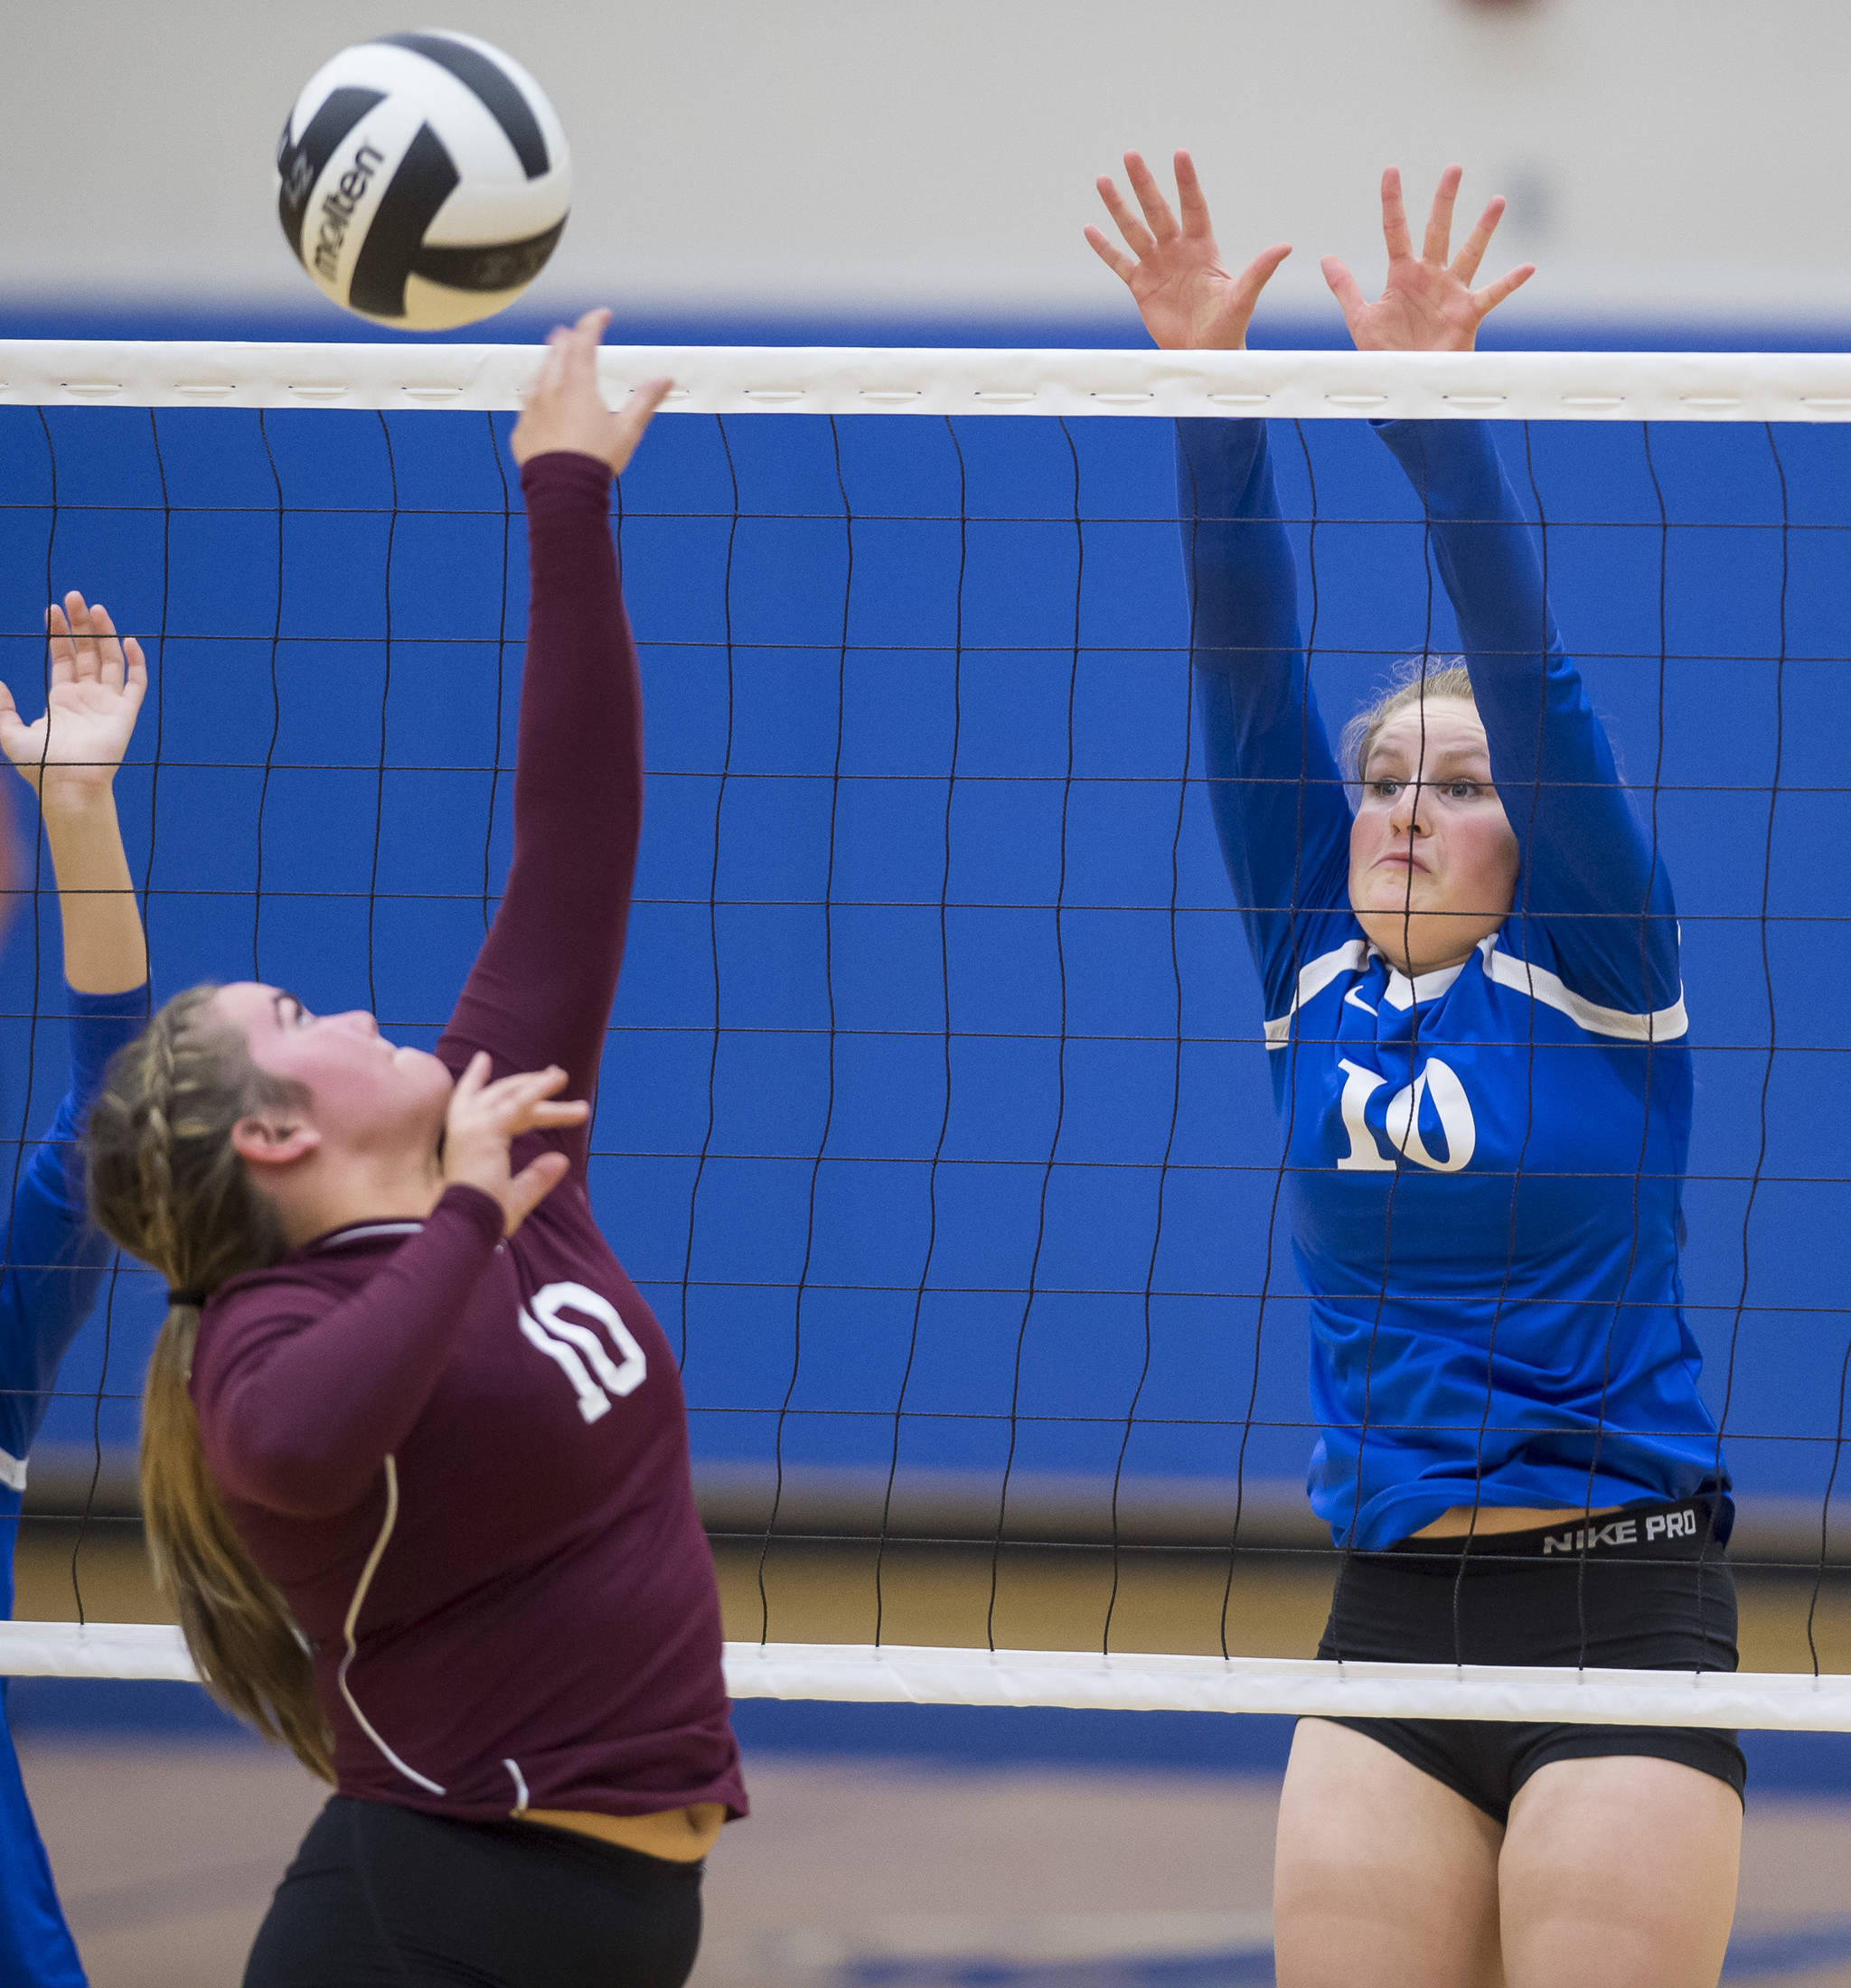 Thunder Mountain’s Audrey Welling attempts to block a shot by Ketchikan’s Makenzie Merrill at TMHS on Friday, Sept. 14, 2018. TMHS won 3-0. (Michael Penn | Juneau Empire)